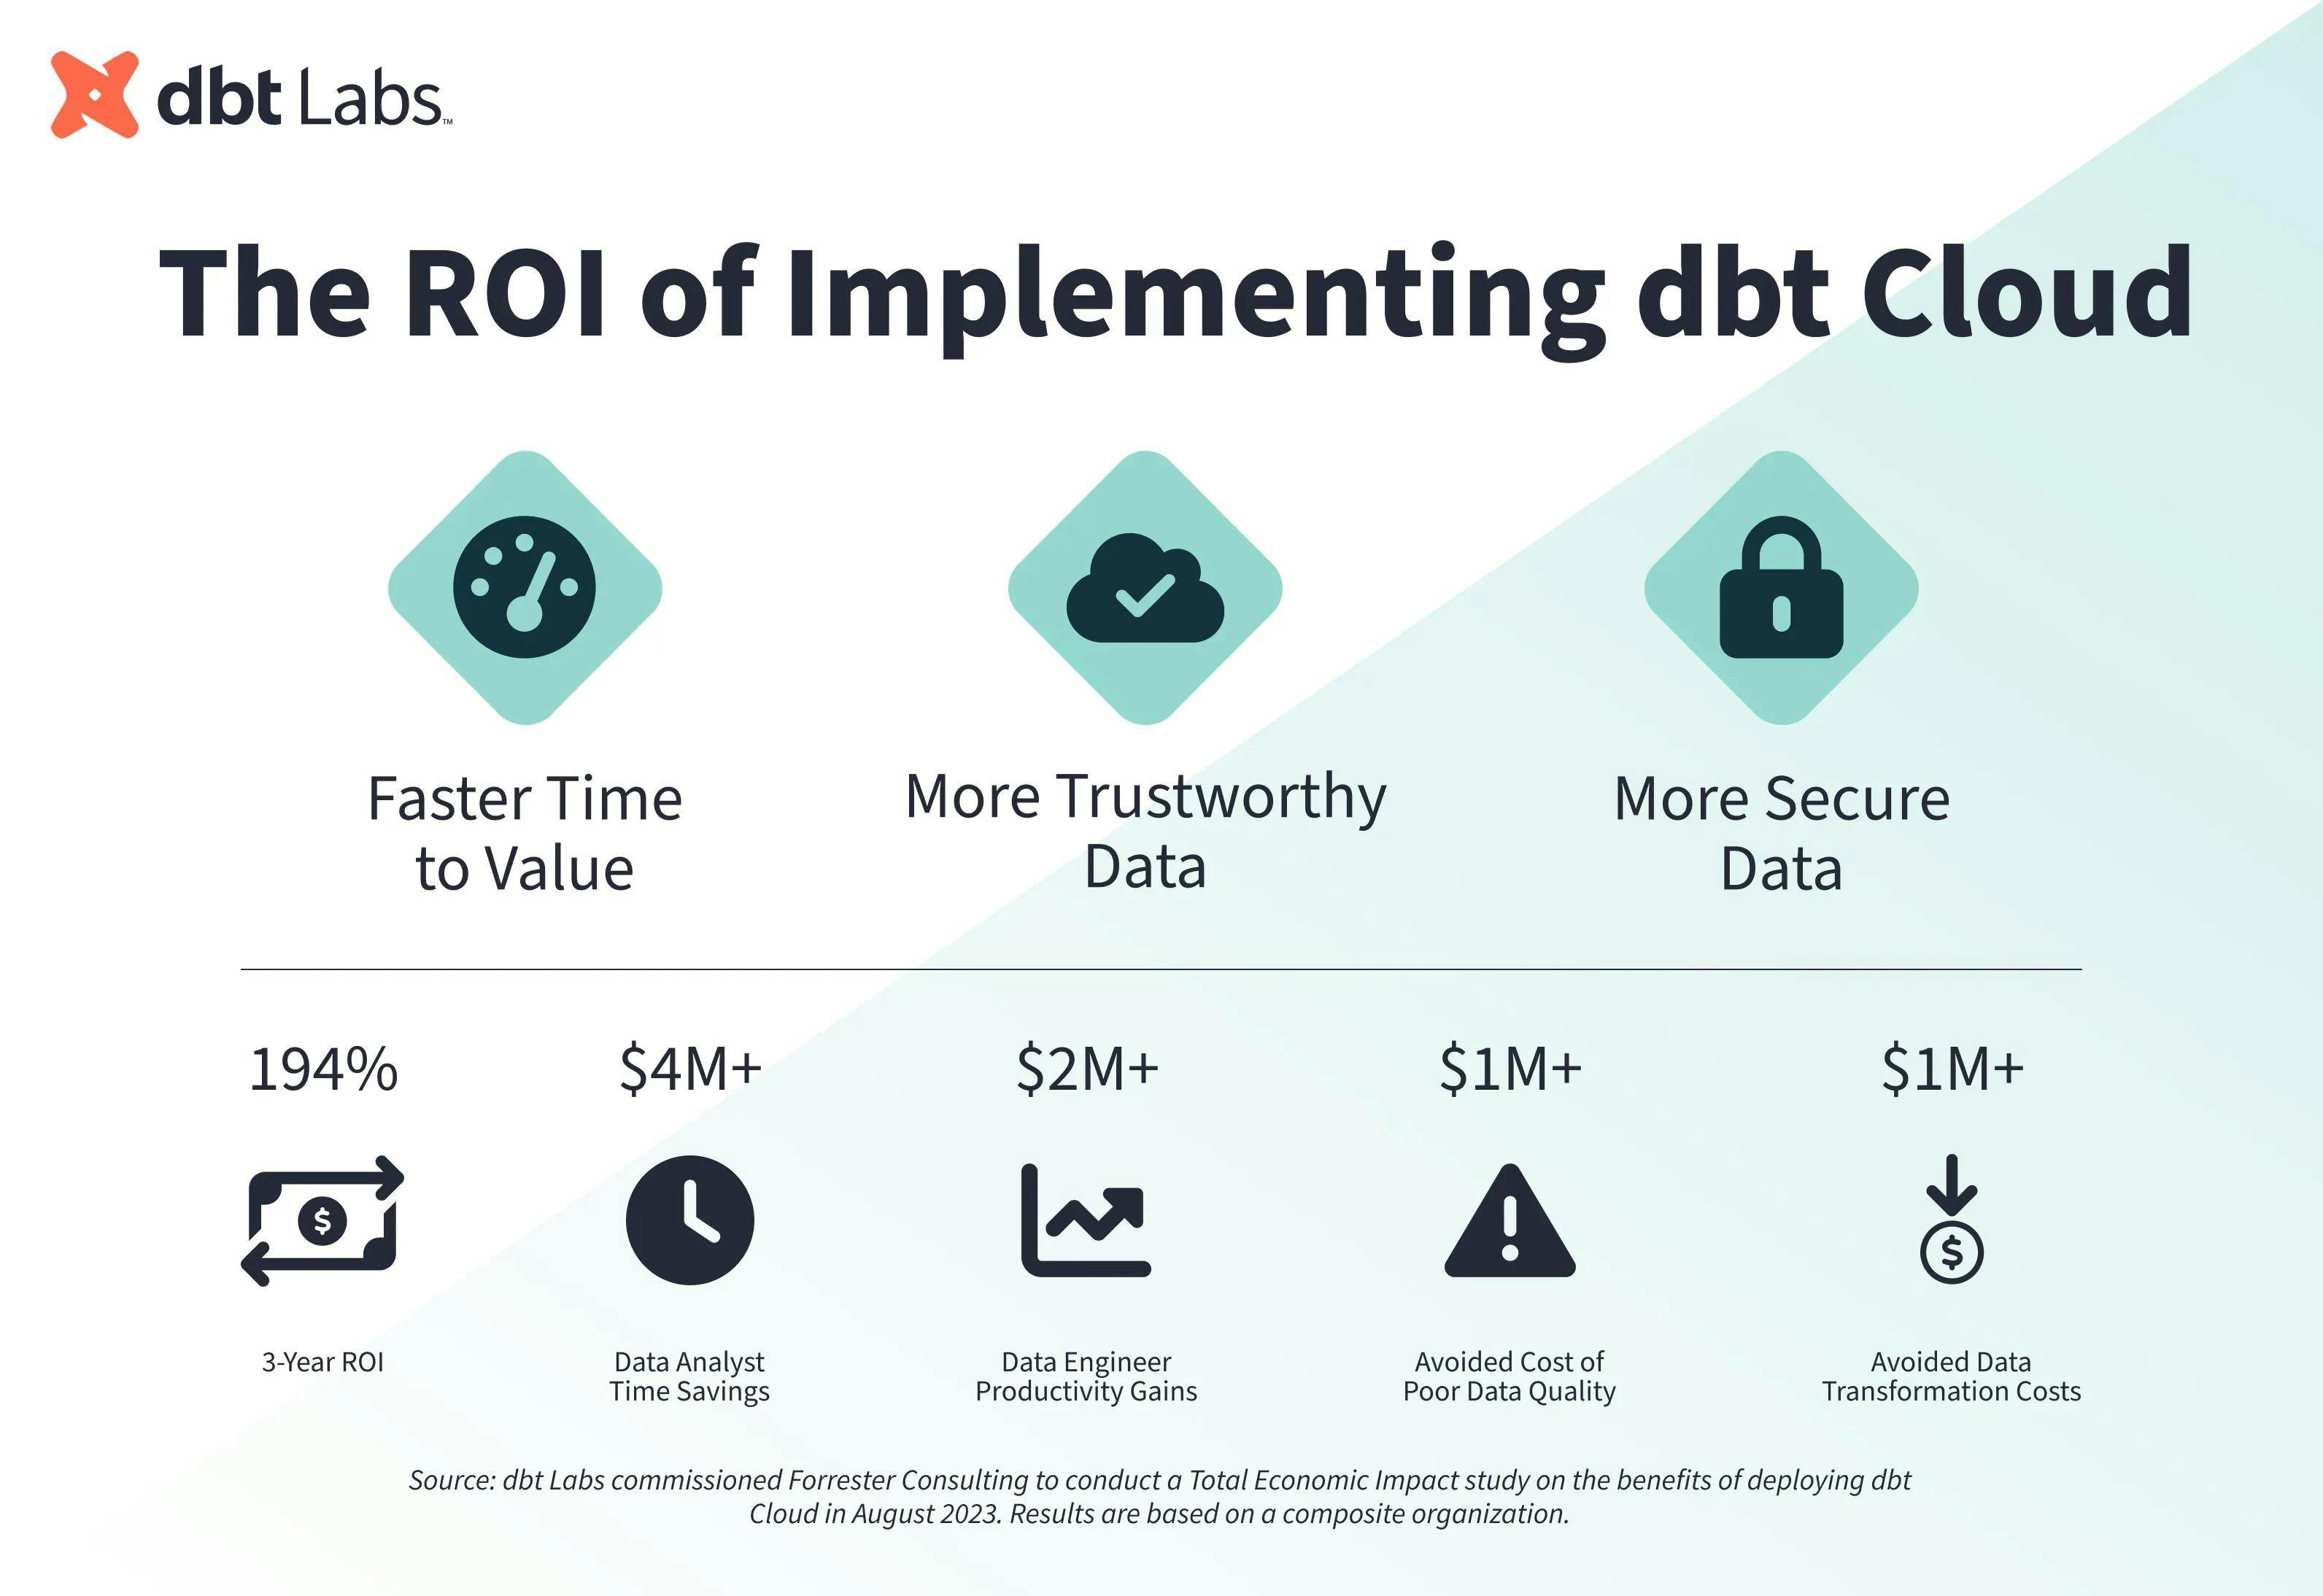 The ROI if implementing dbt Cloud